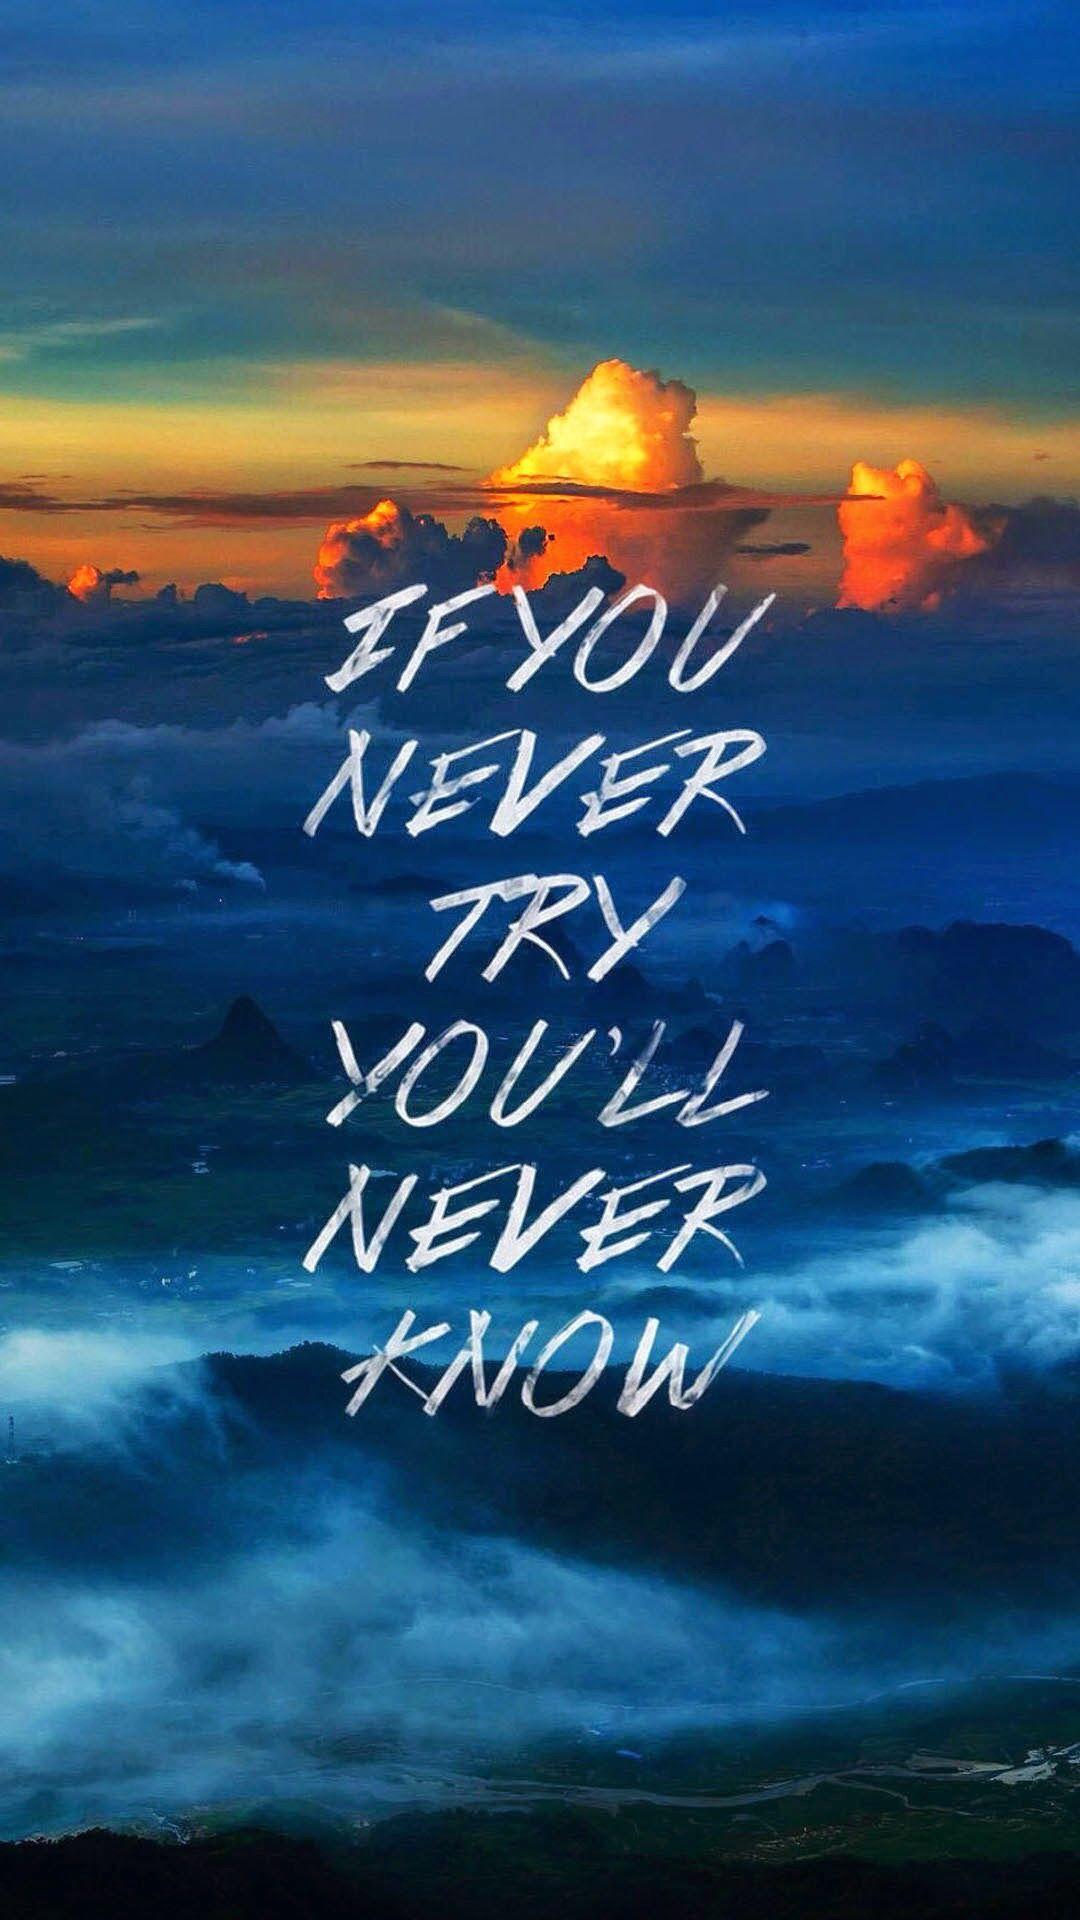 Tap image for more quote wallpaper! Never Know - iPhone